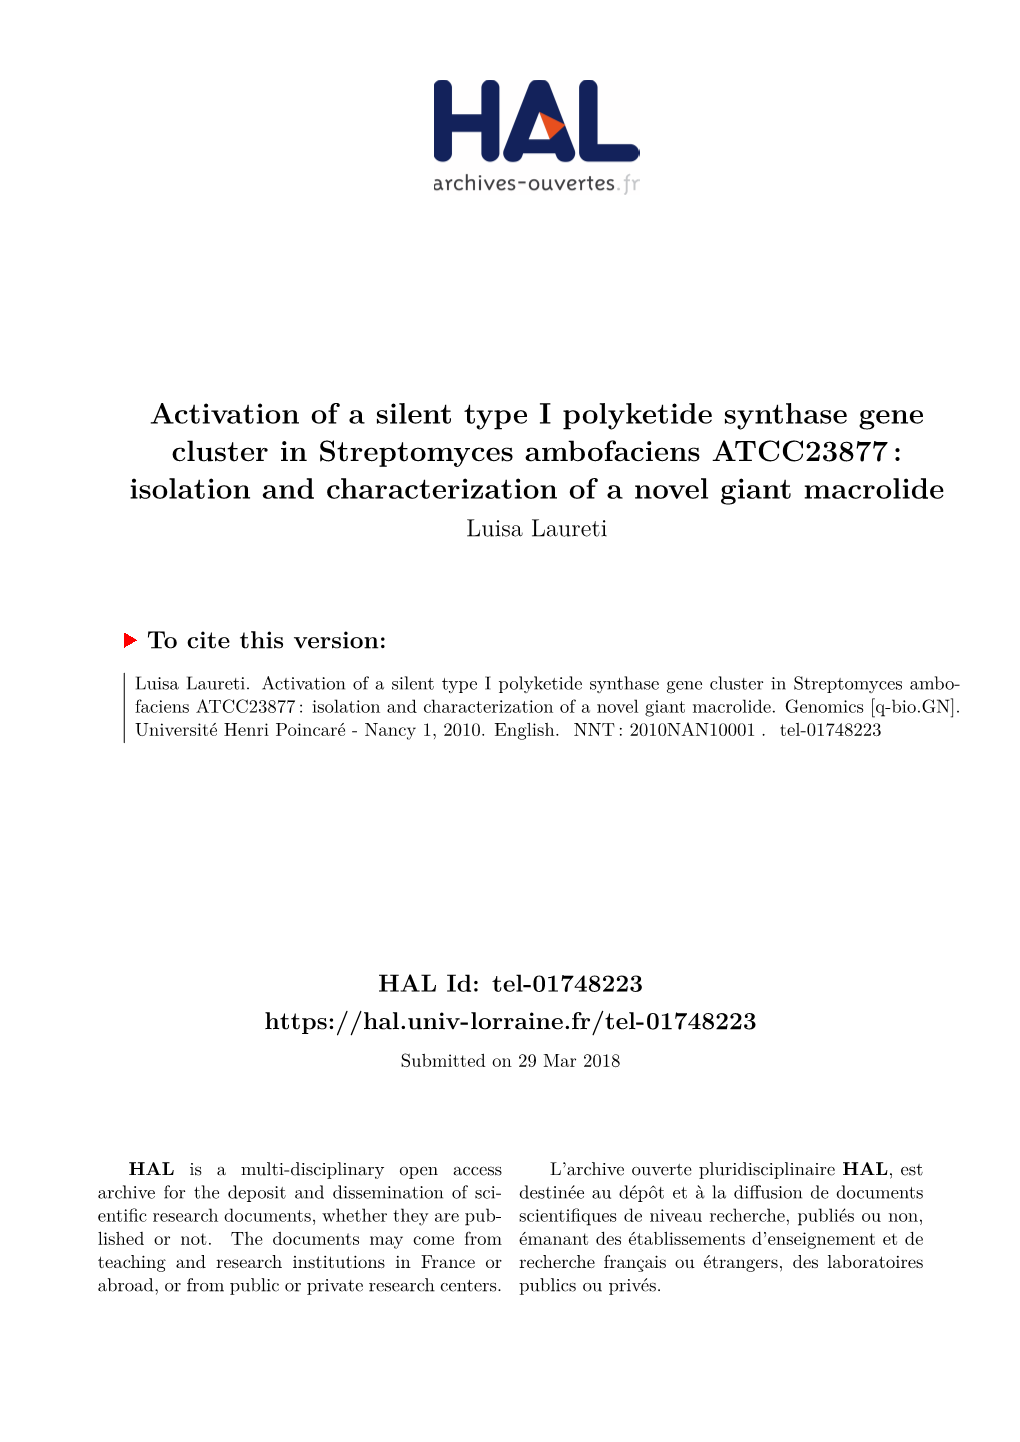 Activation of a Silent Type I Polyketide Synthase Gene Cluster In